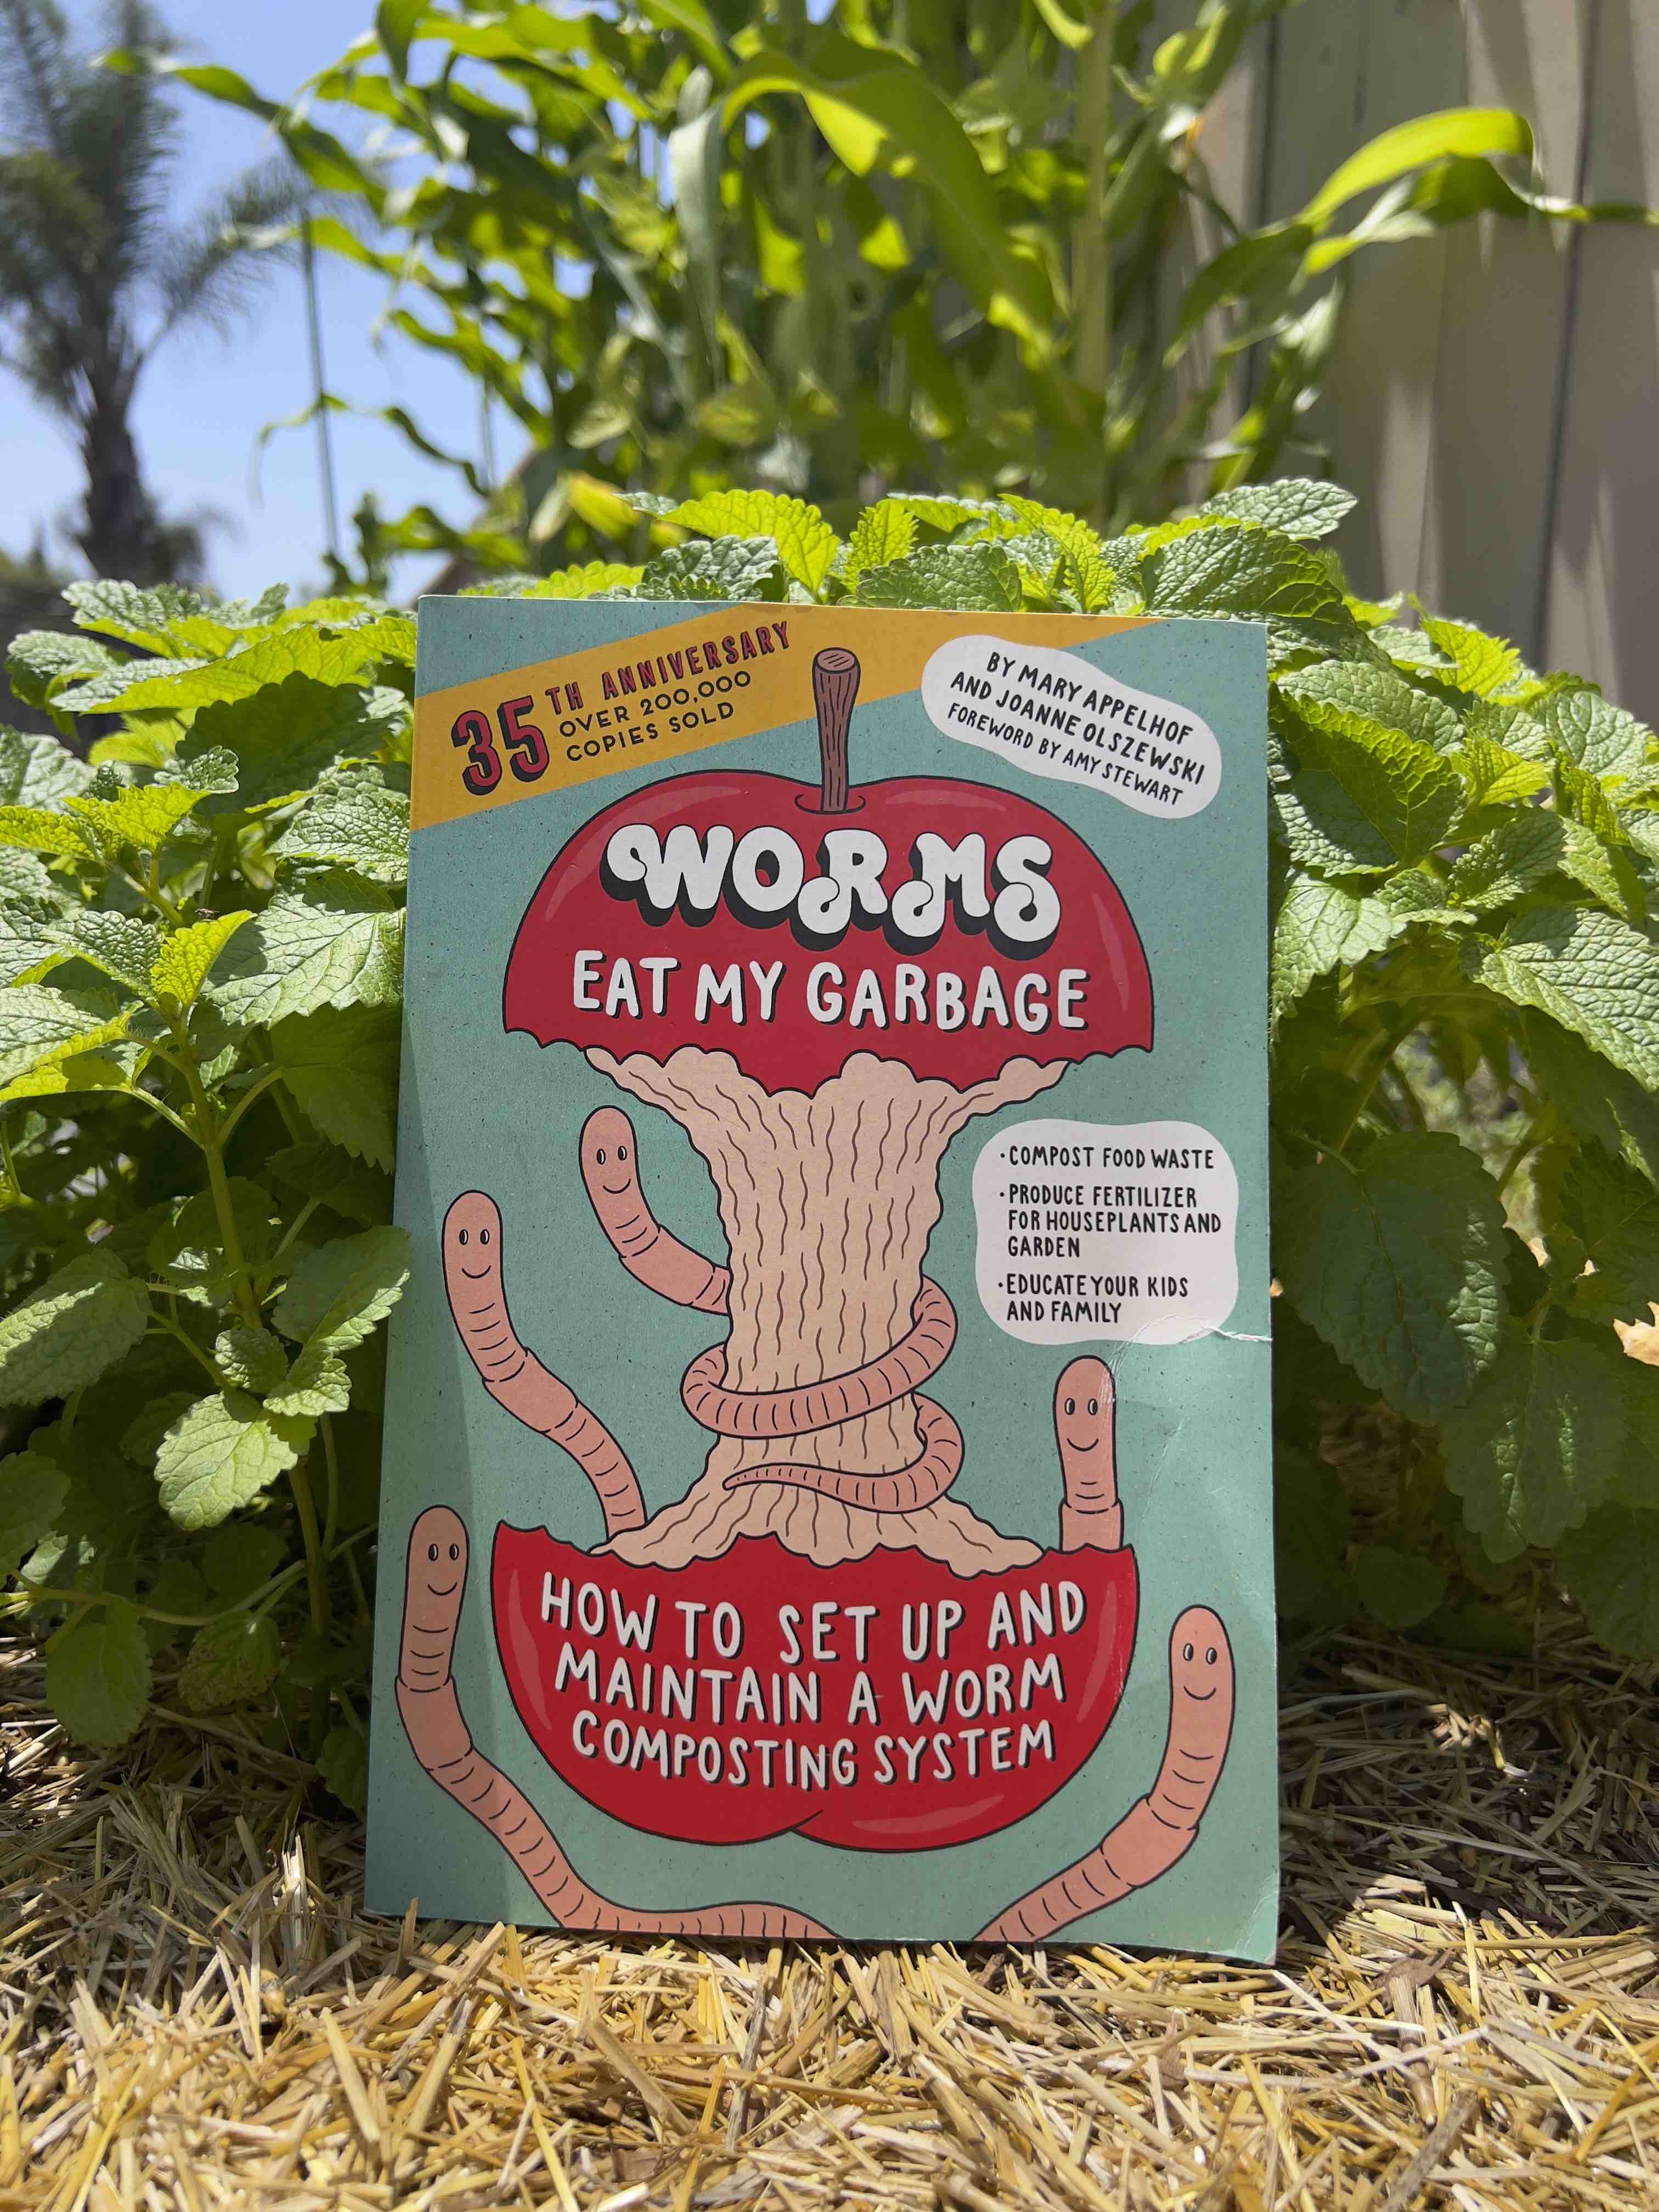 Worms Eat My Garbage, 35th Anniversary Edition Meme's Worms